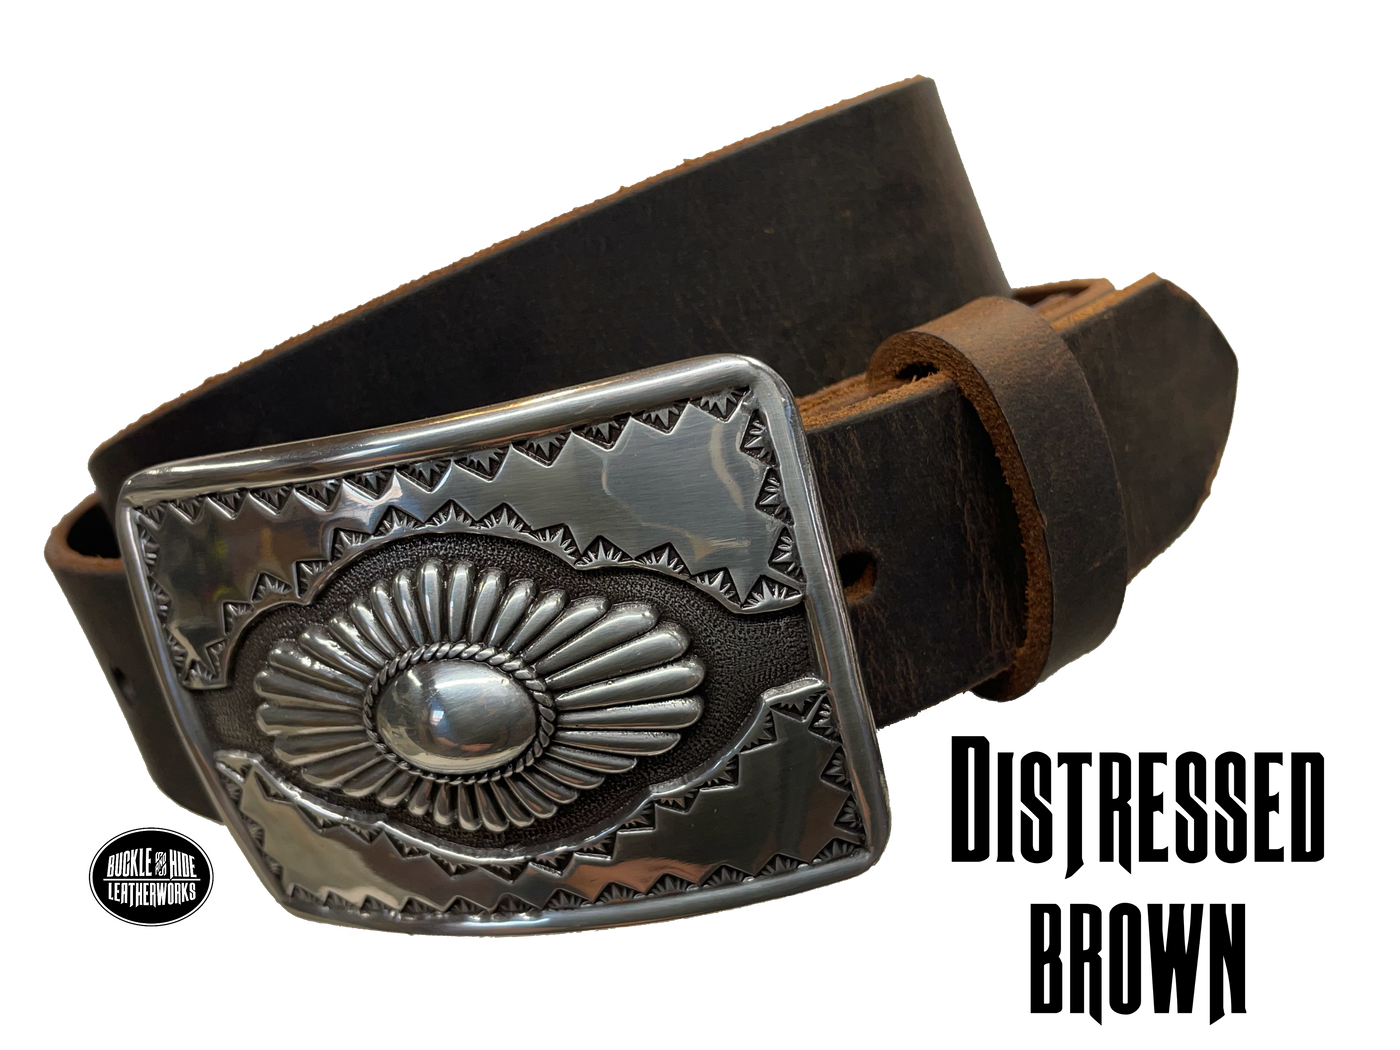 "The Cody" is a Western style belt buckle that will add a classic western look to your belt. ﻿CHOOSE ONE BELT STRIP COLOR! ﻿The belt is made from a single strip of leather in our shop in Smyrna, TN, just outside Nashville. The buckle is imported. ﻿Available in our retail and online shops. Distressed brown.